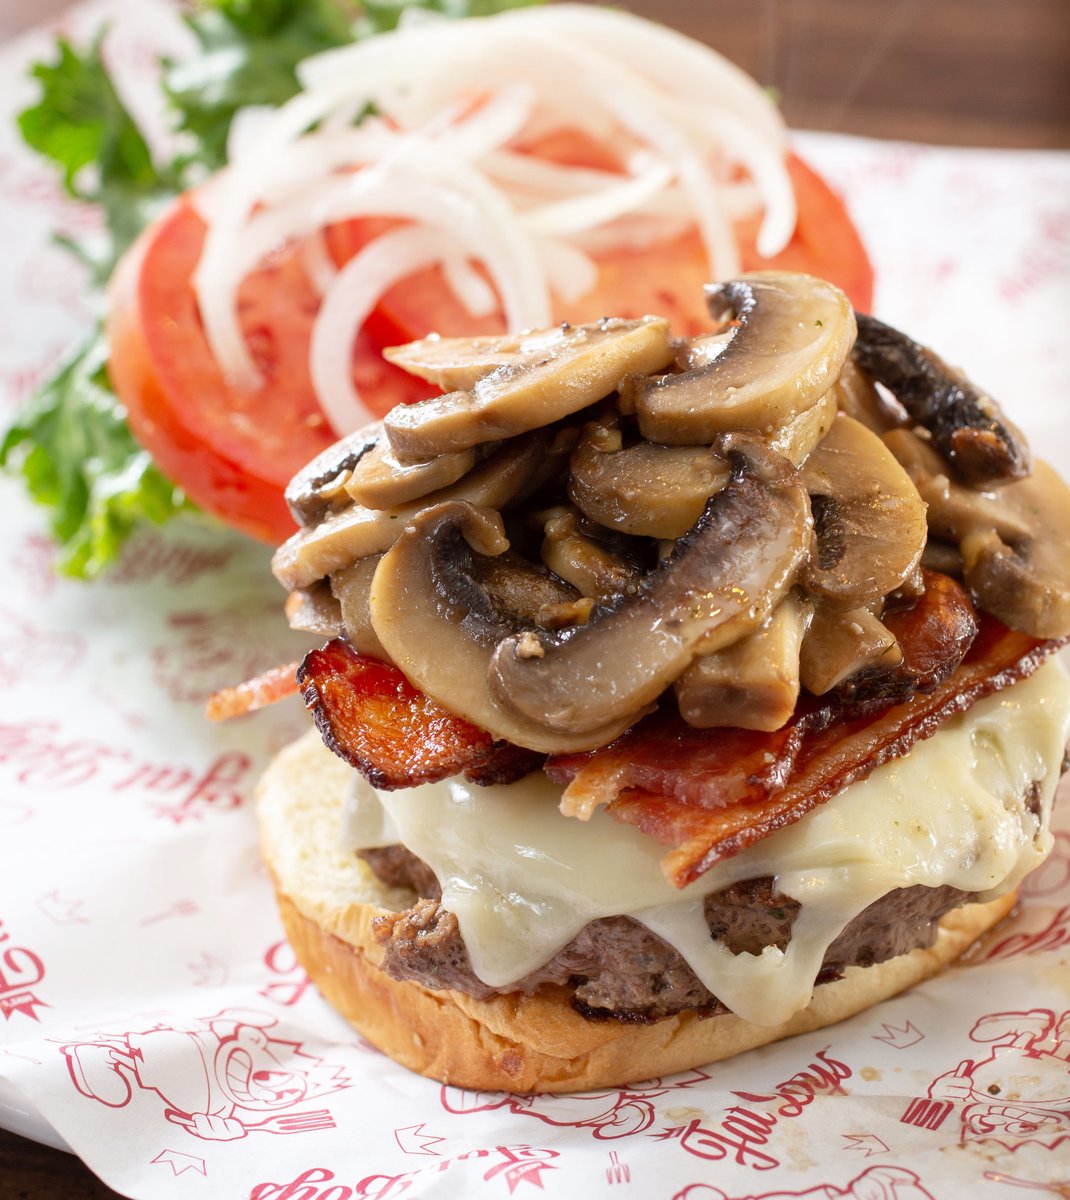 Have you had the chance to experience the exquisite flavors of the Famous Mikey Burger?

#famousmikeyburger #foodie #burgers #foodporn #foodlover #deliciousflavors #mikesfatboys #enchantednibblescatering #ChefMichaelGray #mushrooms #garlic